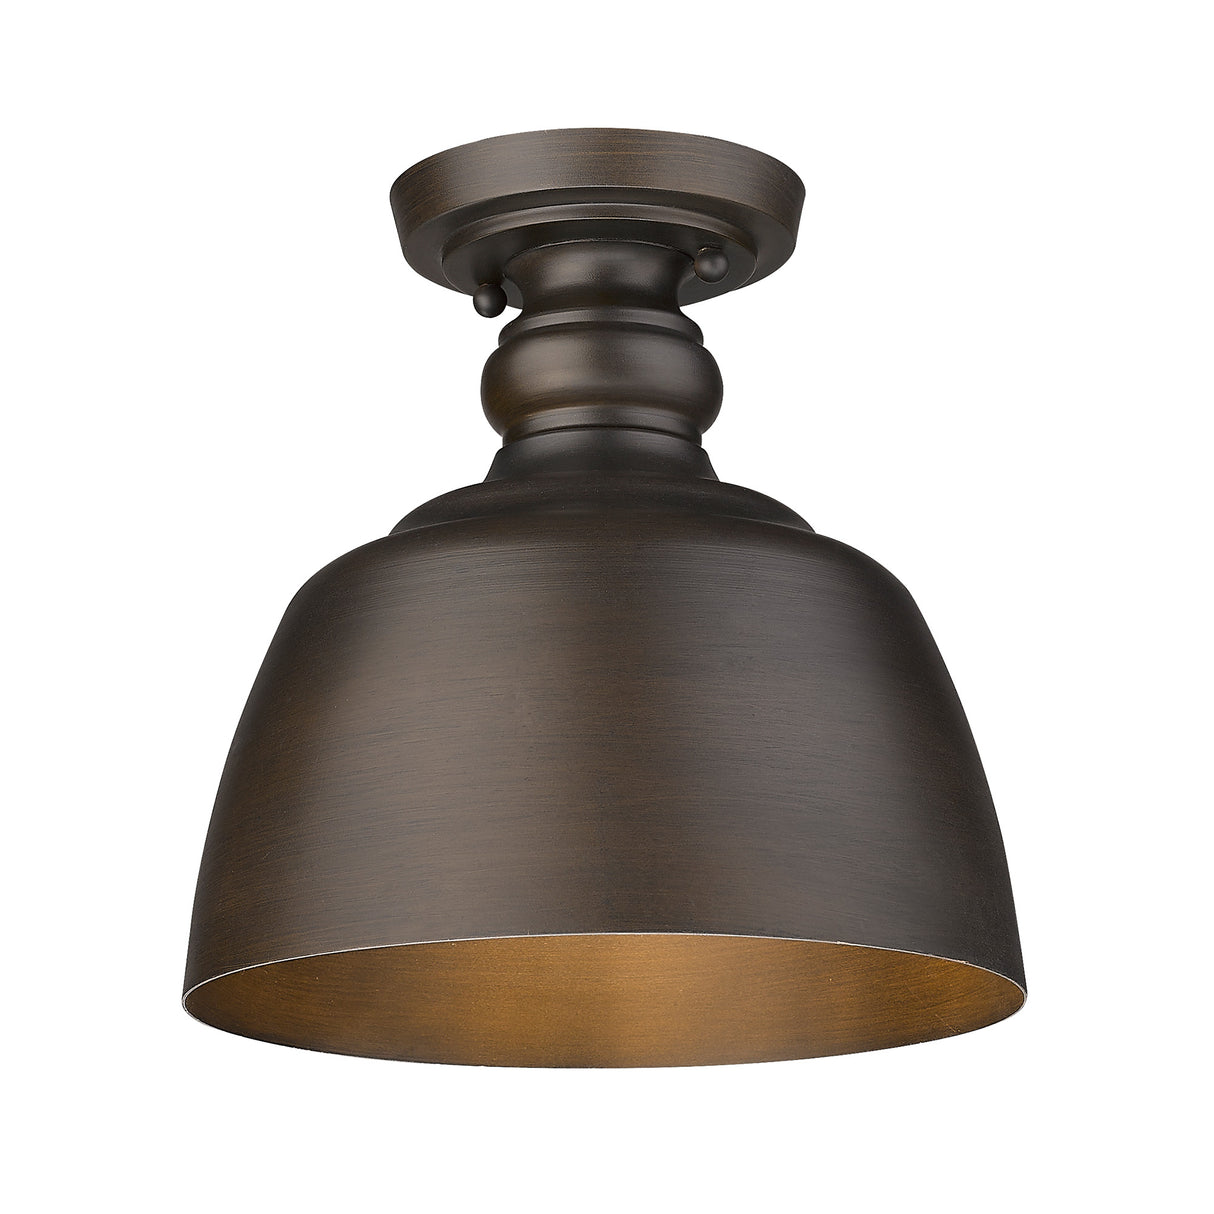 Holmes Flush Mount in Rubbed Bronze